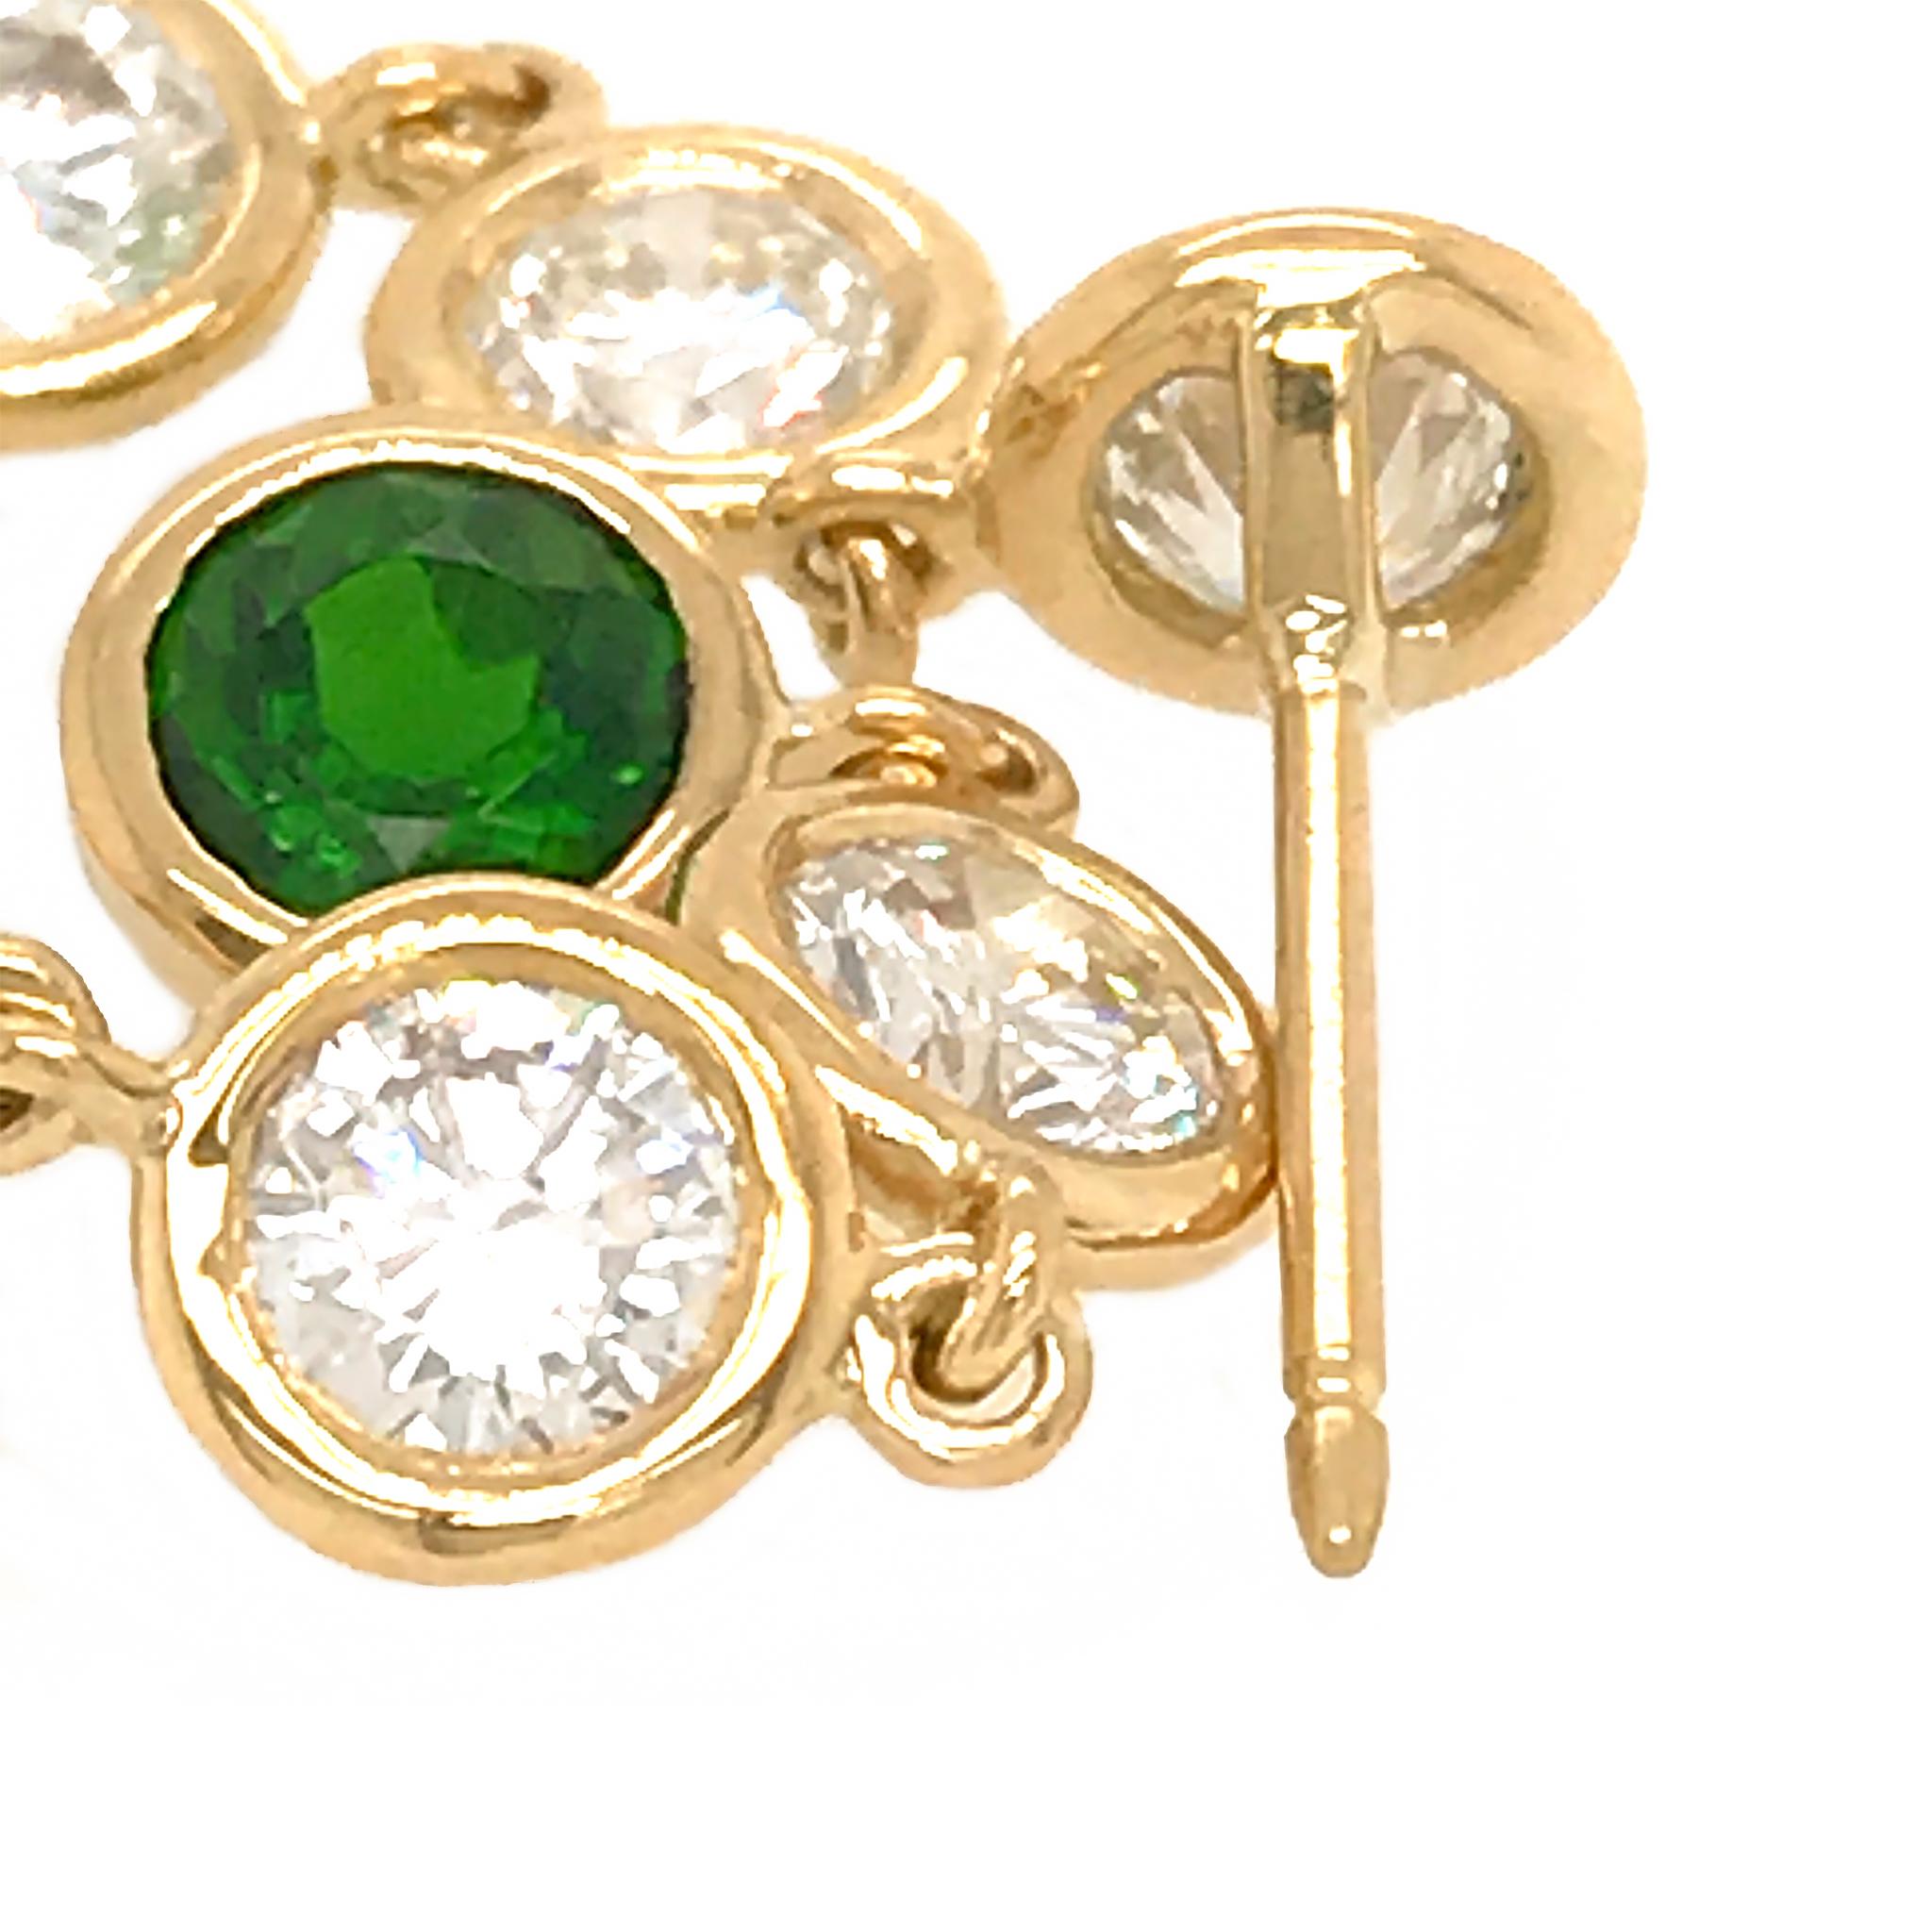 18k Yellow Gold
Diamond: 1.88 ct twd 
Chrome Diopside: 1.09 ct twd 
Total Weight: 3.7 grams
Length: 1.30 inches